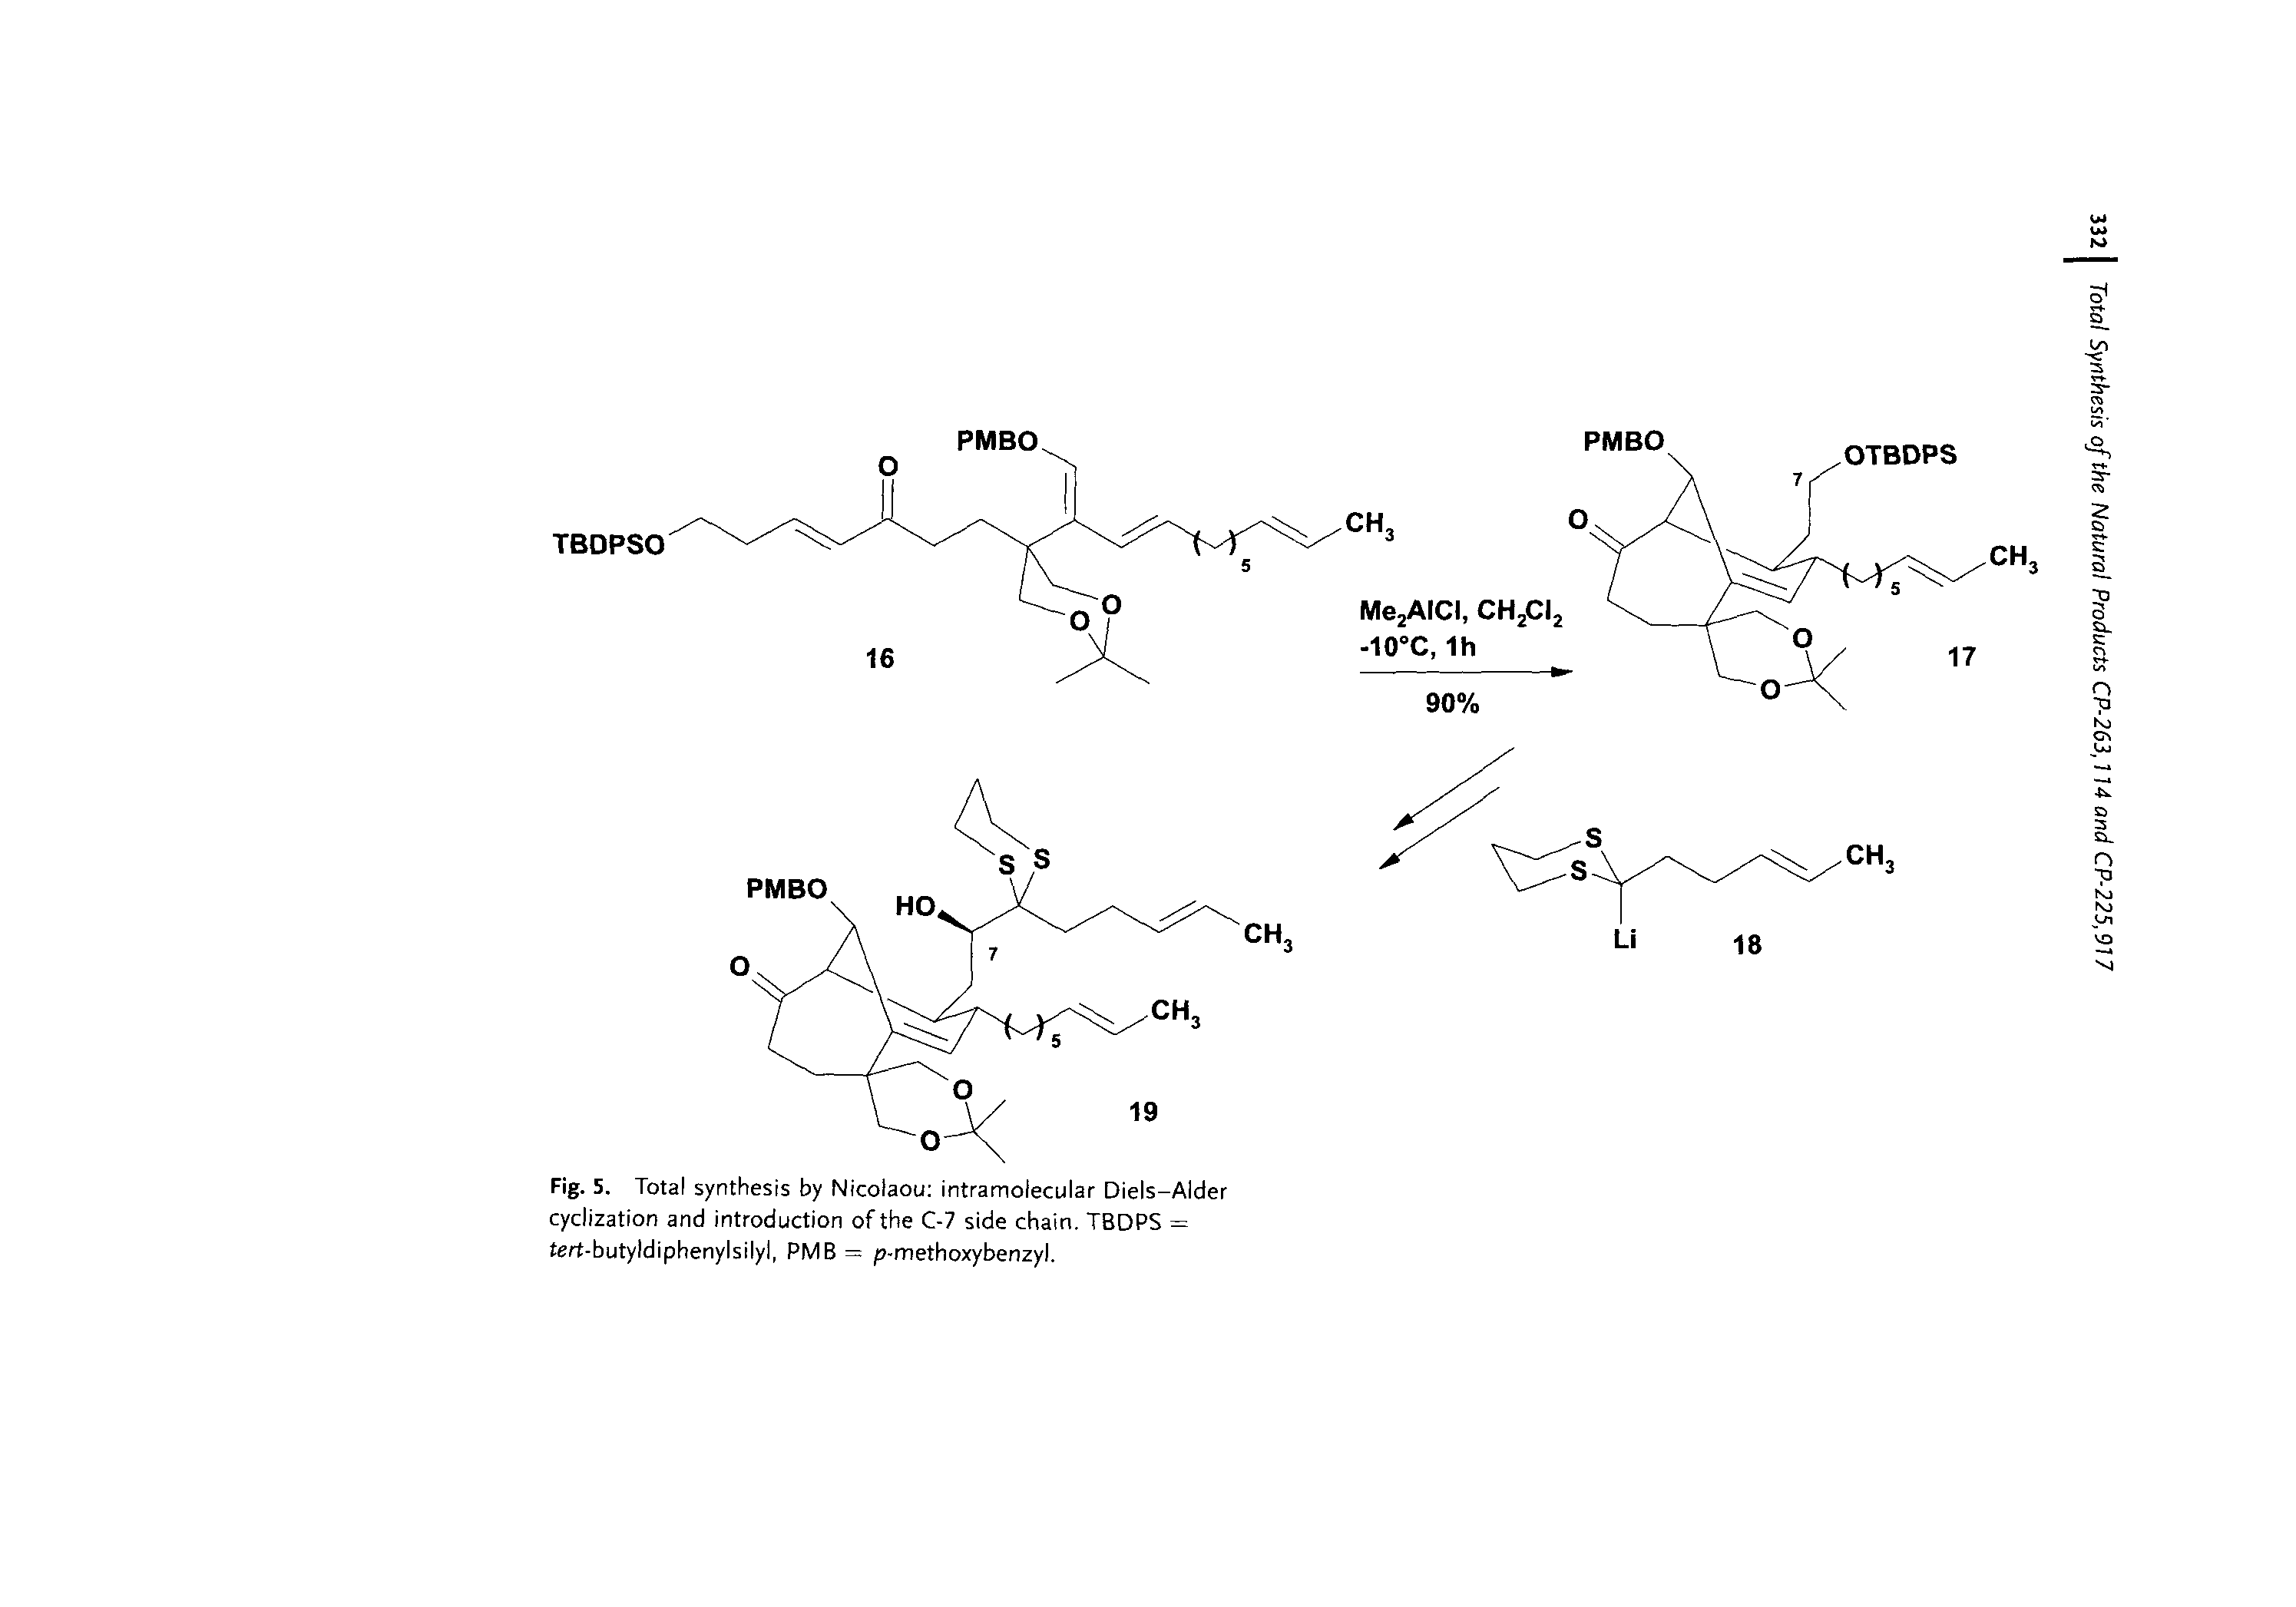 Fig. 5. Total synthesis by Nicolaou intramolecular Diels-Alder cyclization and introduction of the C-7 side chain. TBDPS = tert-butyldiphenylsilyl, PMB = p-methoxybenzyl.